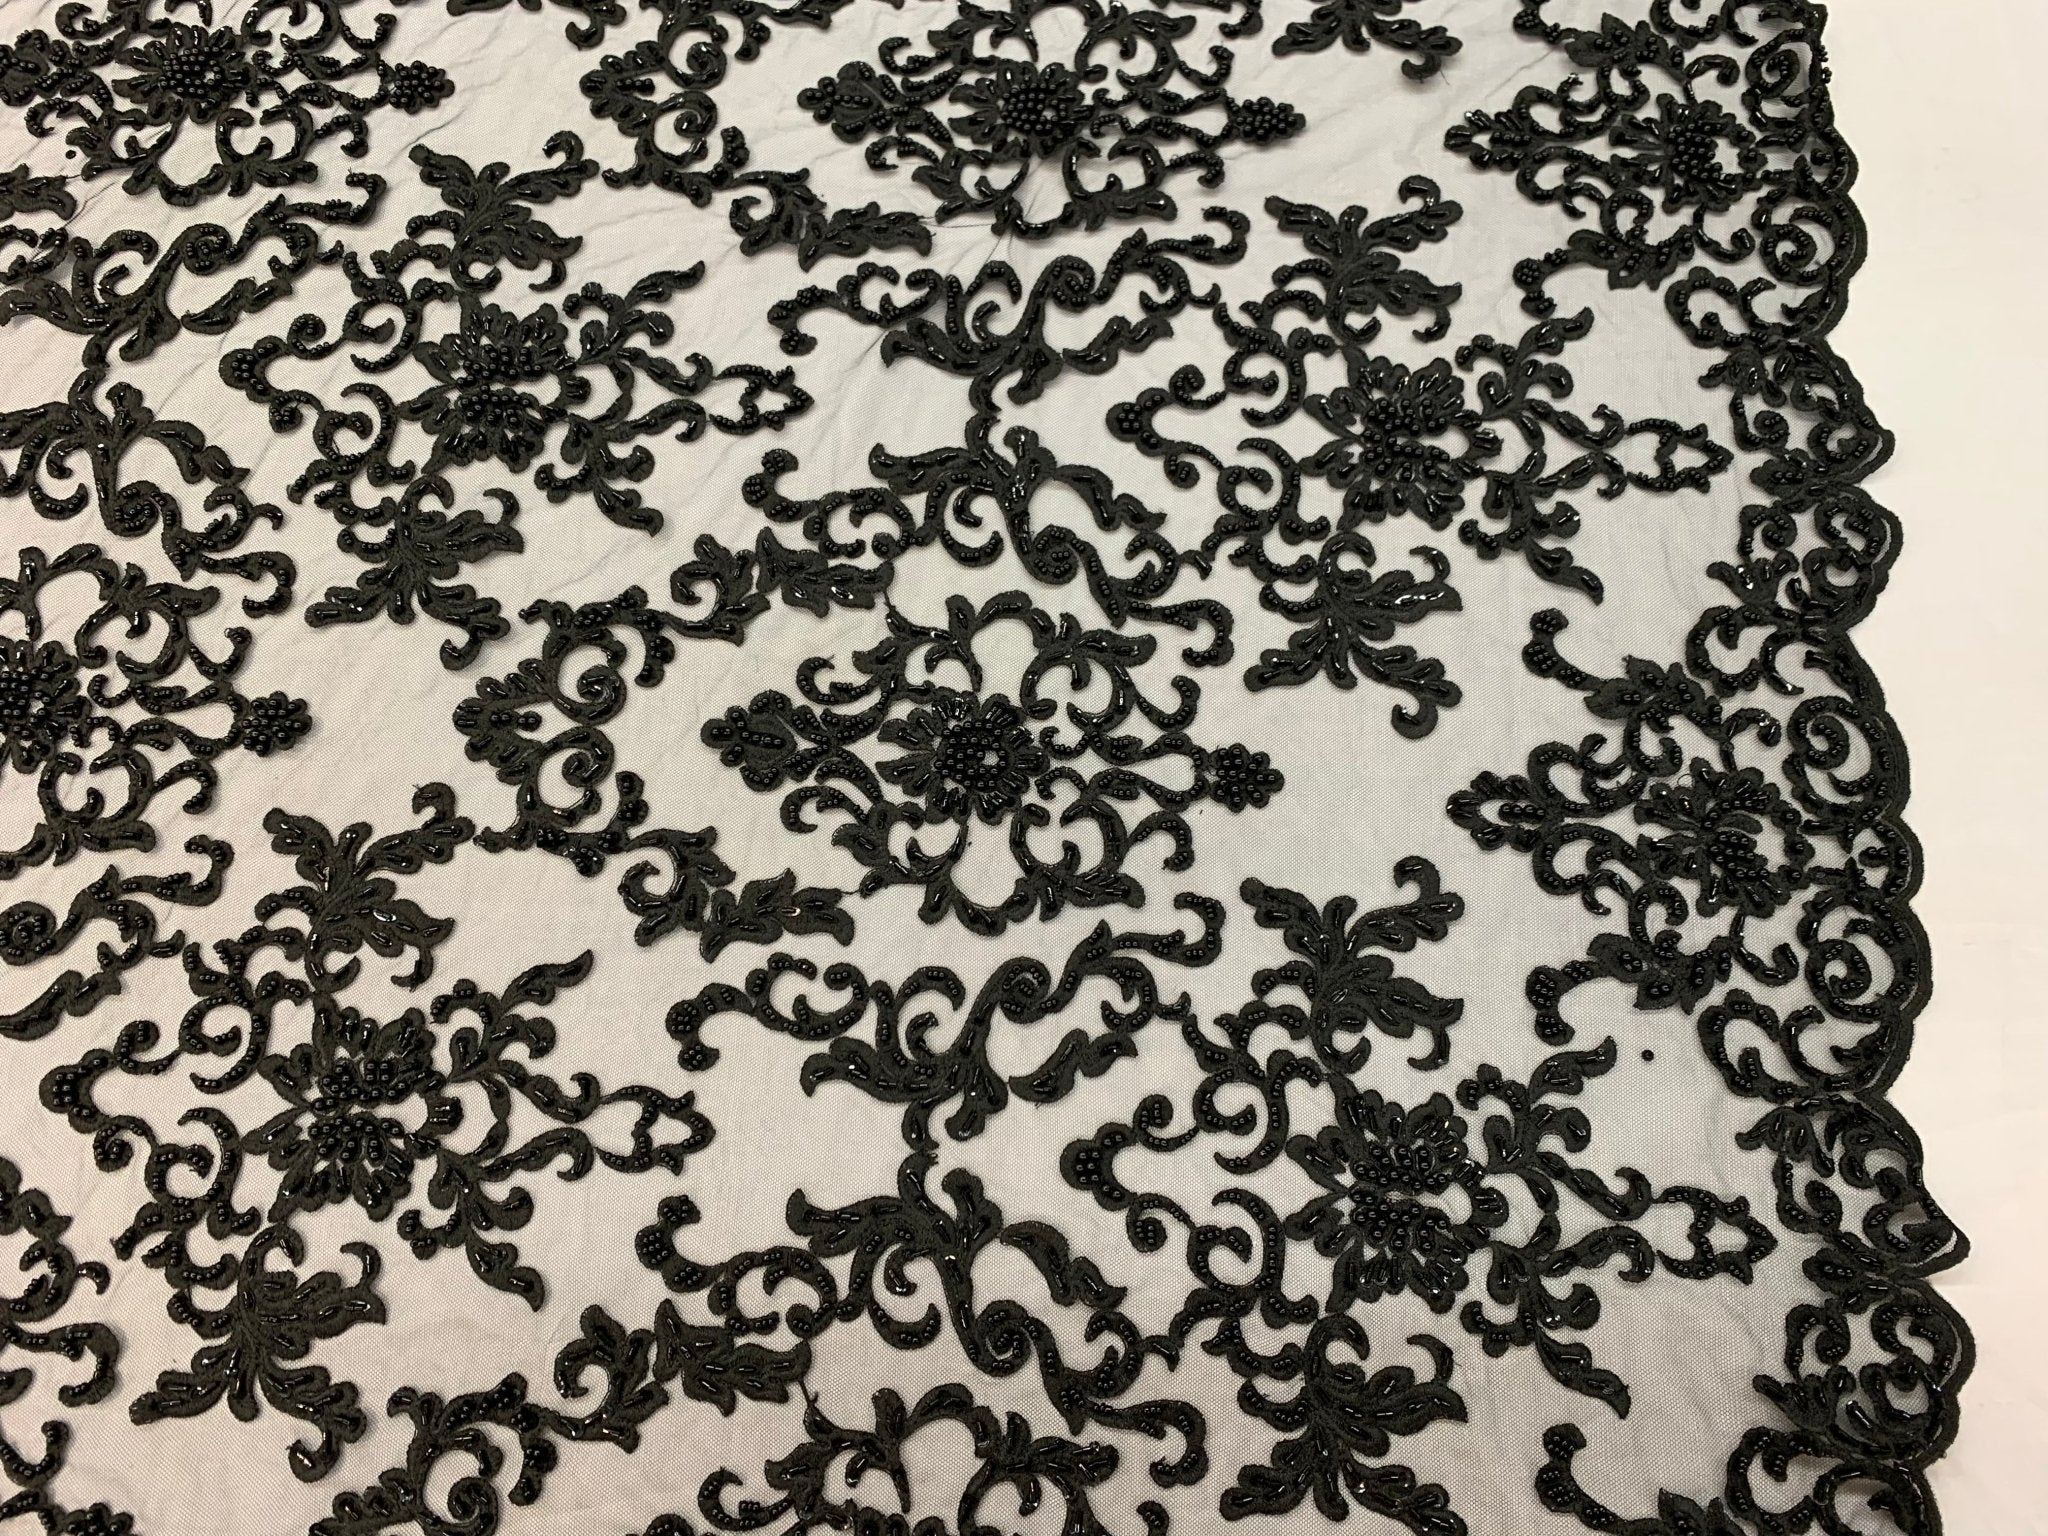 Deluxe Heavy Embroidered Glass Beaded Mesh Lace Fabric For Wedding, GownsICEFABRICICE FABRICSBlackDeluxe Heavy Embroidered Glass Beaded Mesh Lace Fabric For Wedding, Gowns ICEFABRIC Black